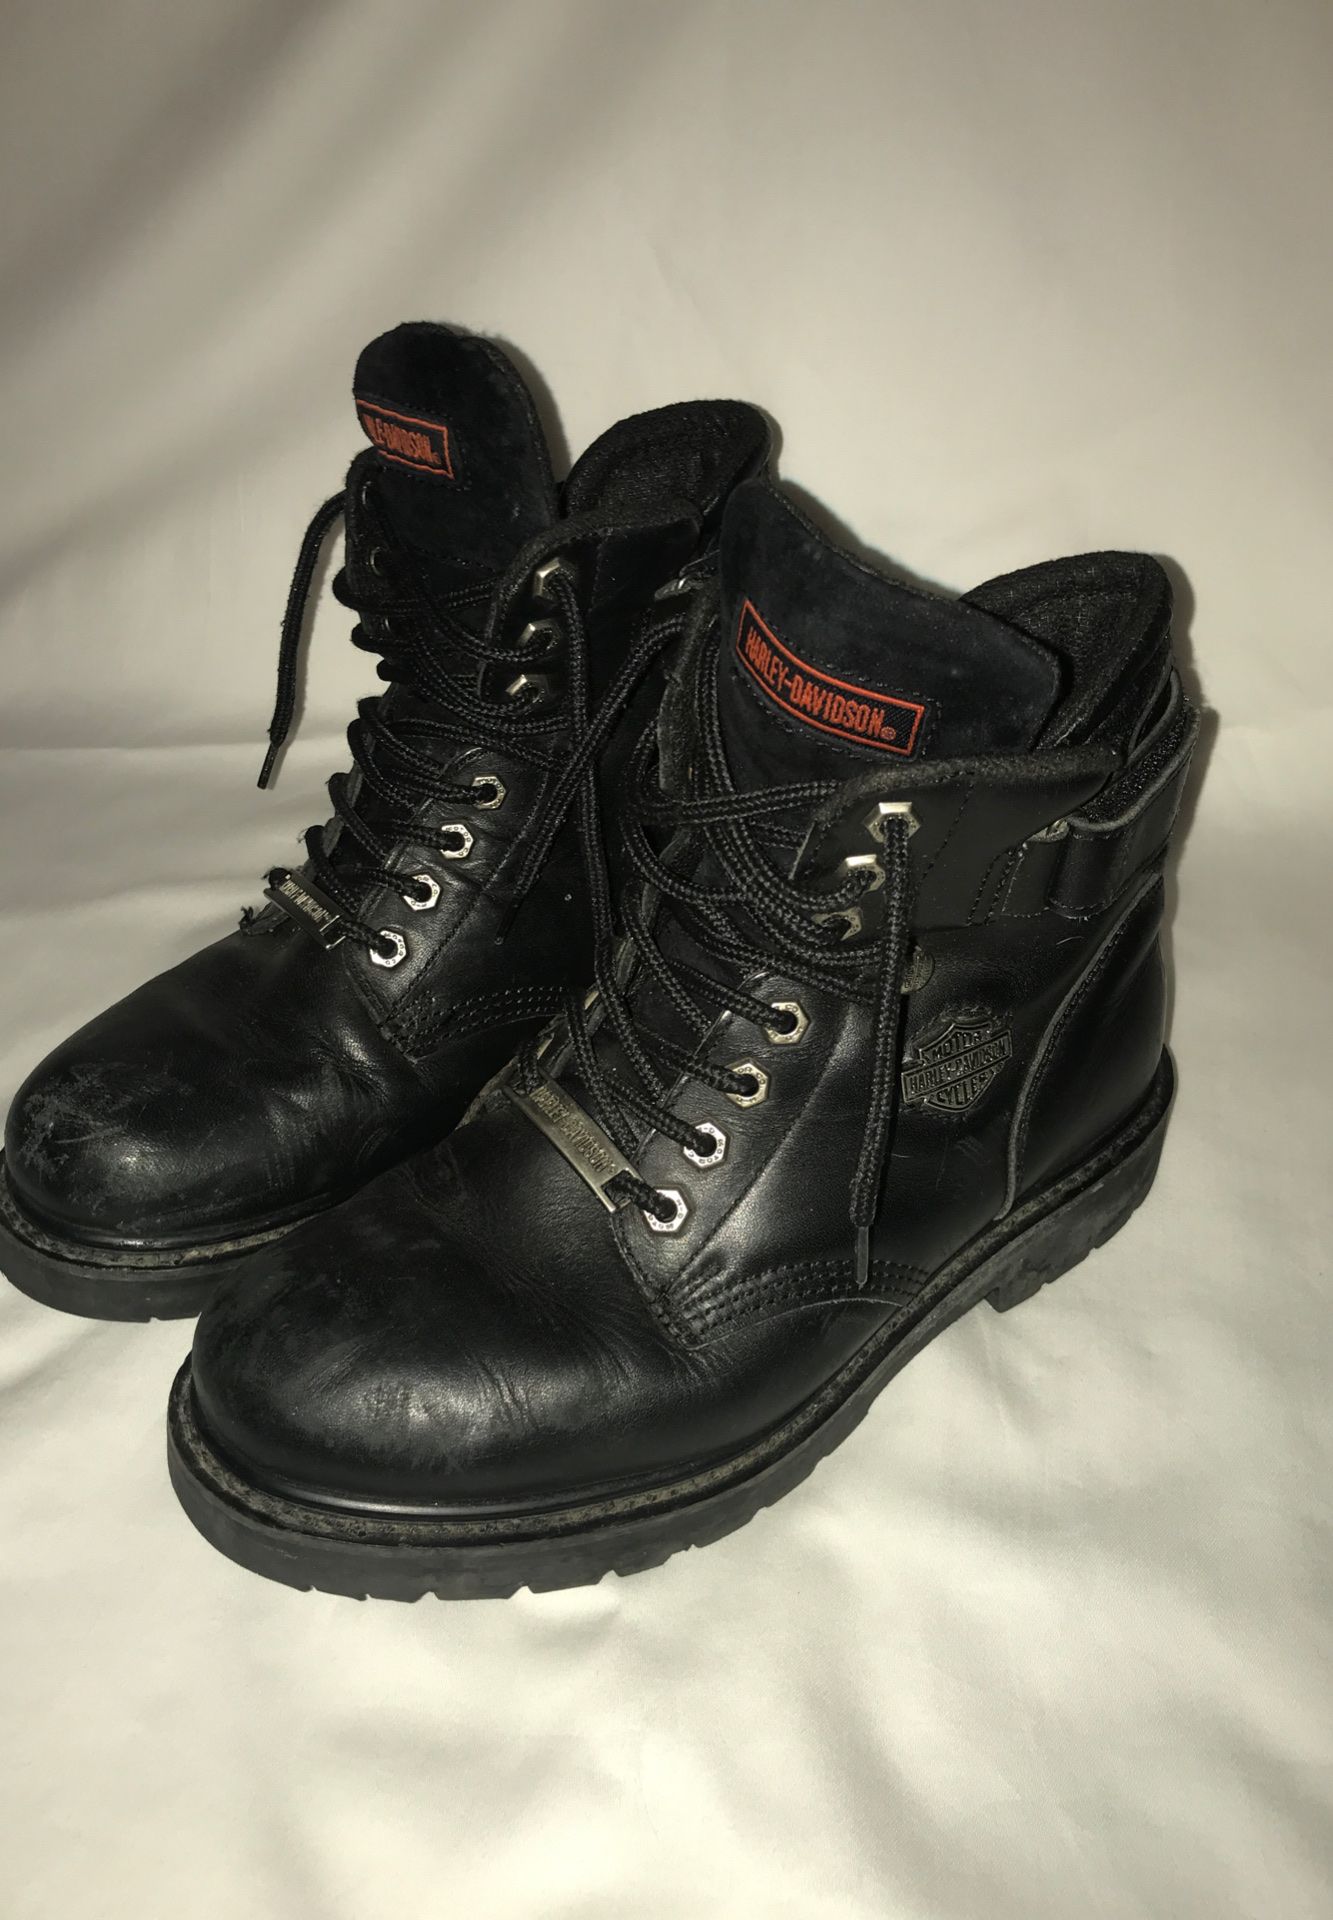 Mens 8.5 Leather Harley Davidson Boots motorcycle